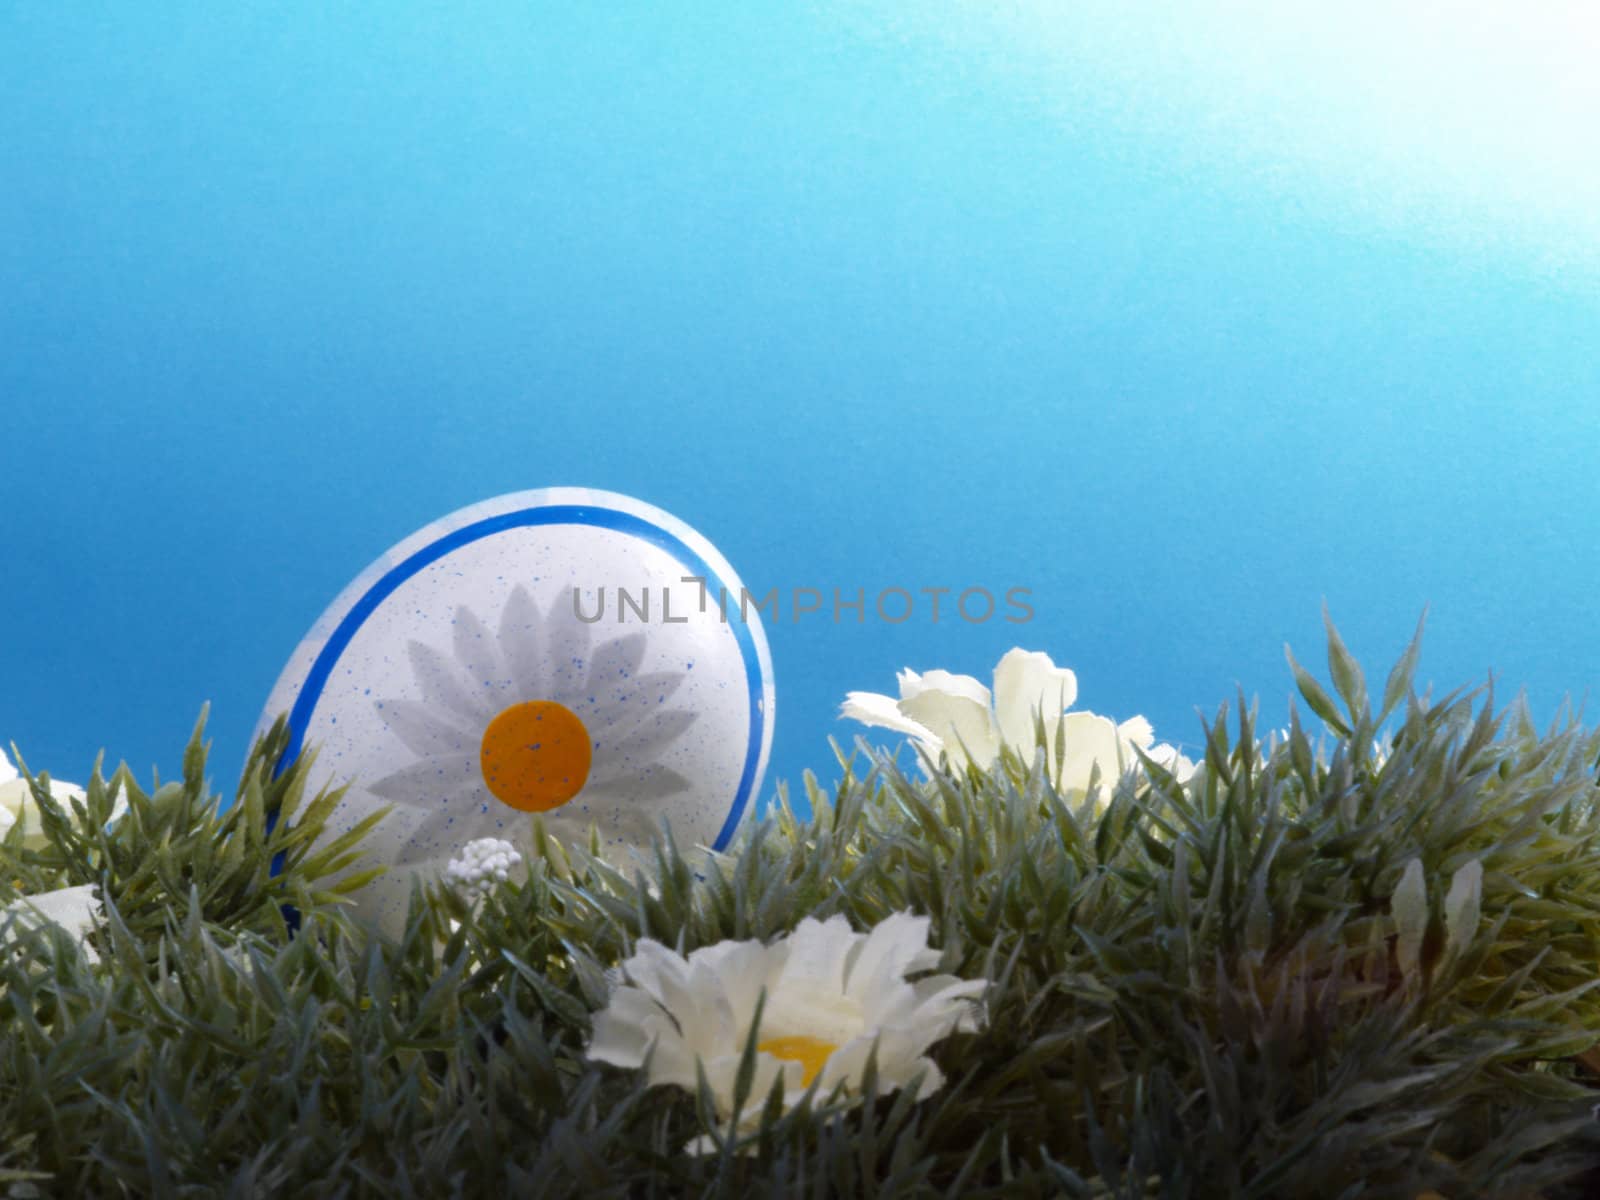 handpainted daisy design on easter egg, artificial grass and blossoms, shades of blue background